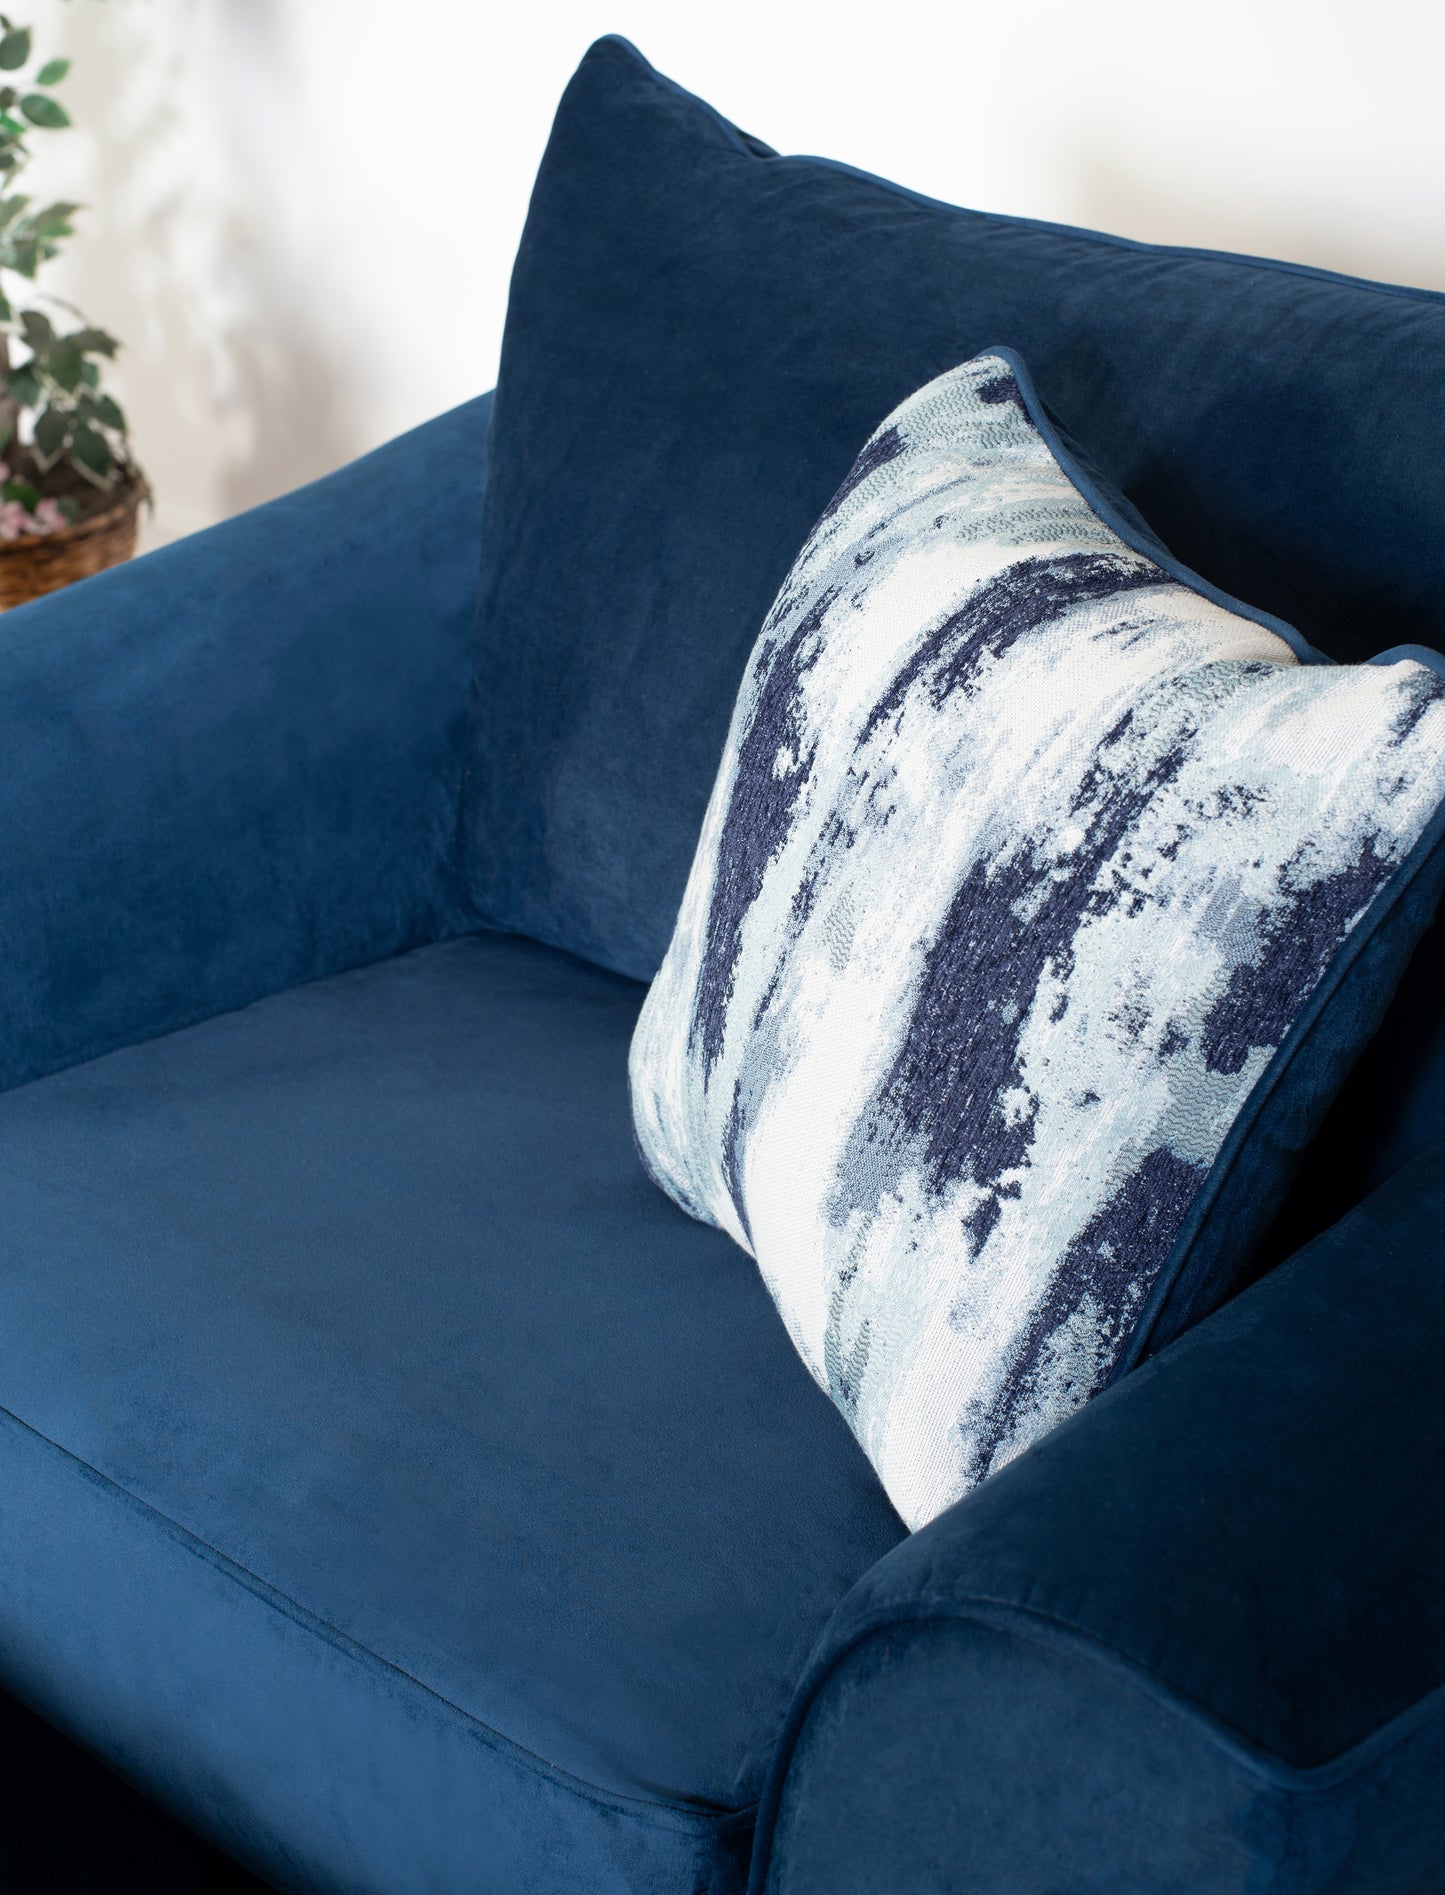 Camero Fabric Pillowback Chair in Navy Blue